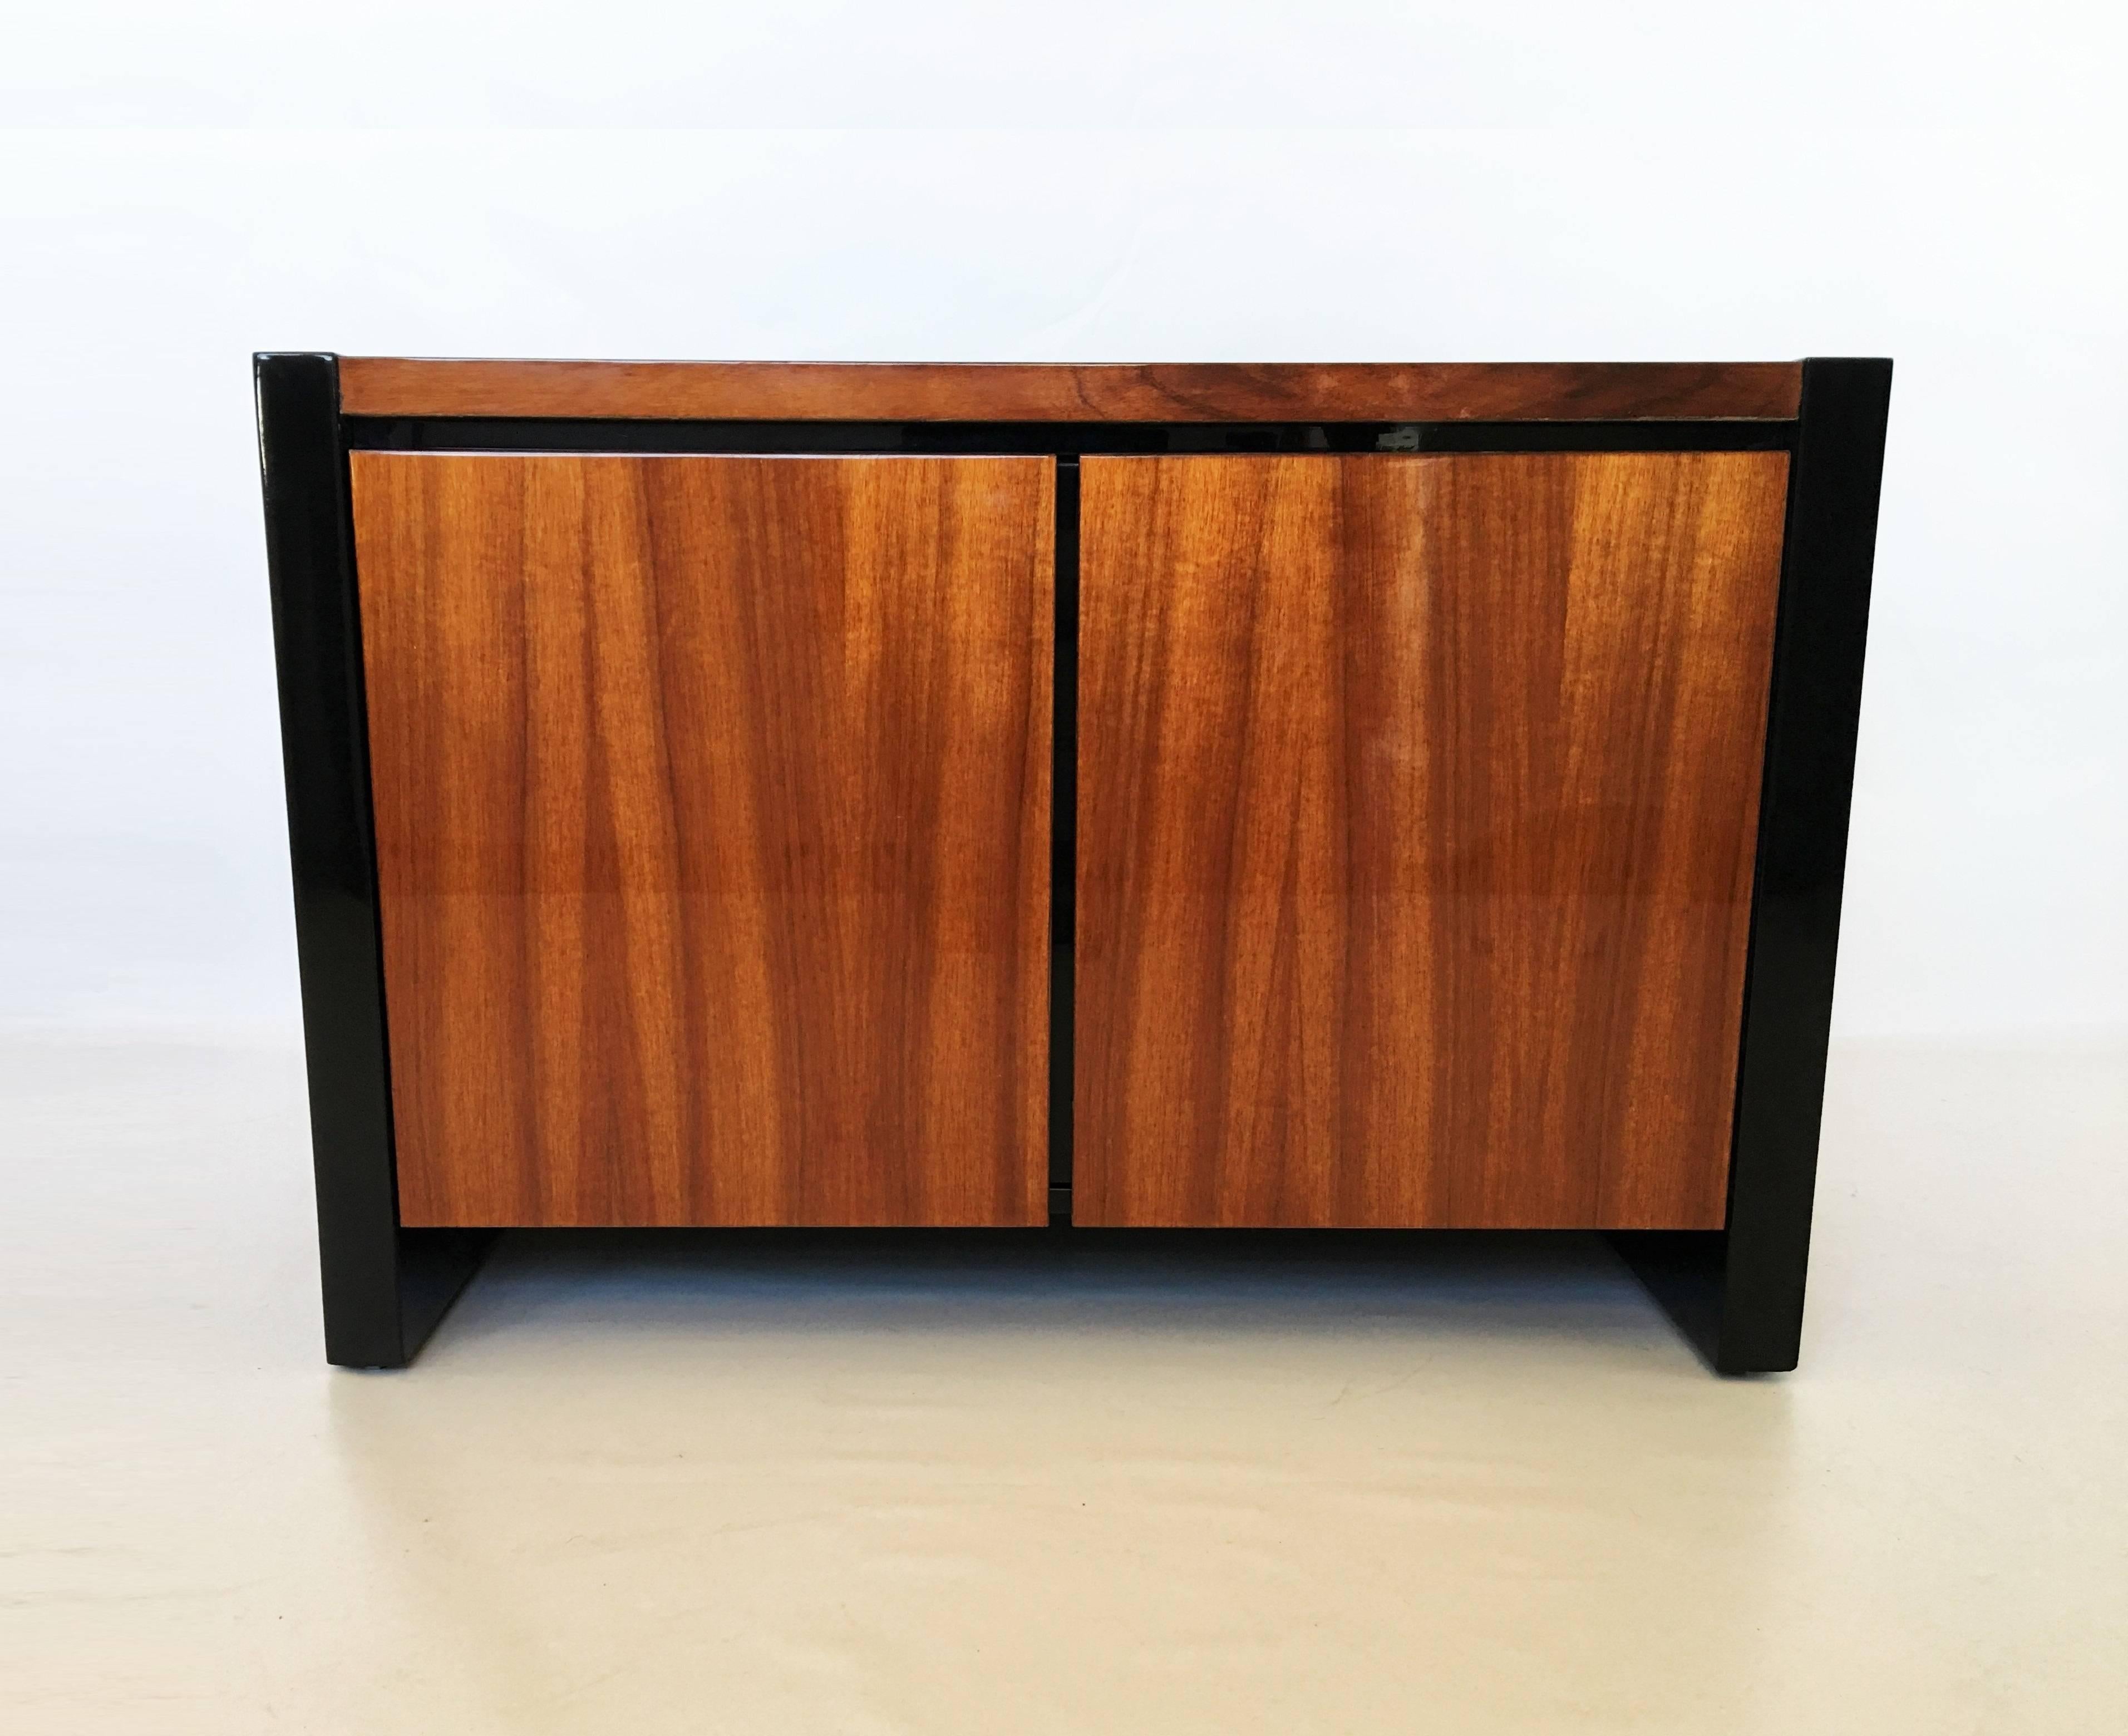 Stunning pair of Henredon Koa wood and black lacquer nightstands or side tables from the Elan Collection by Henredon. Featuring Hawaiian koa wood with black lacquer trim. Beautiful grain of the koa wood contrasted against the black lacquer. Each